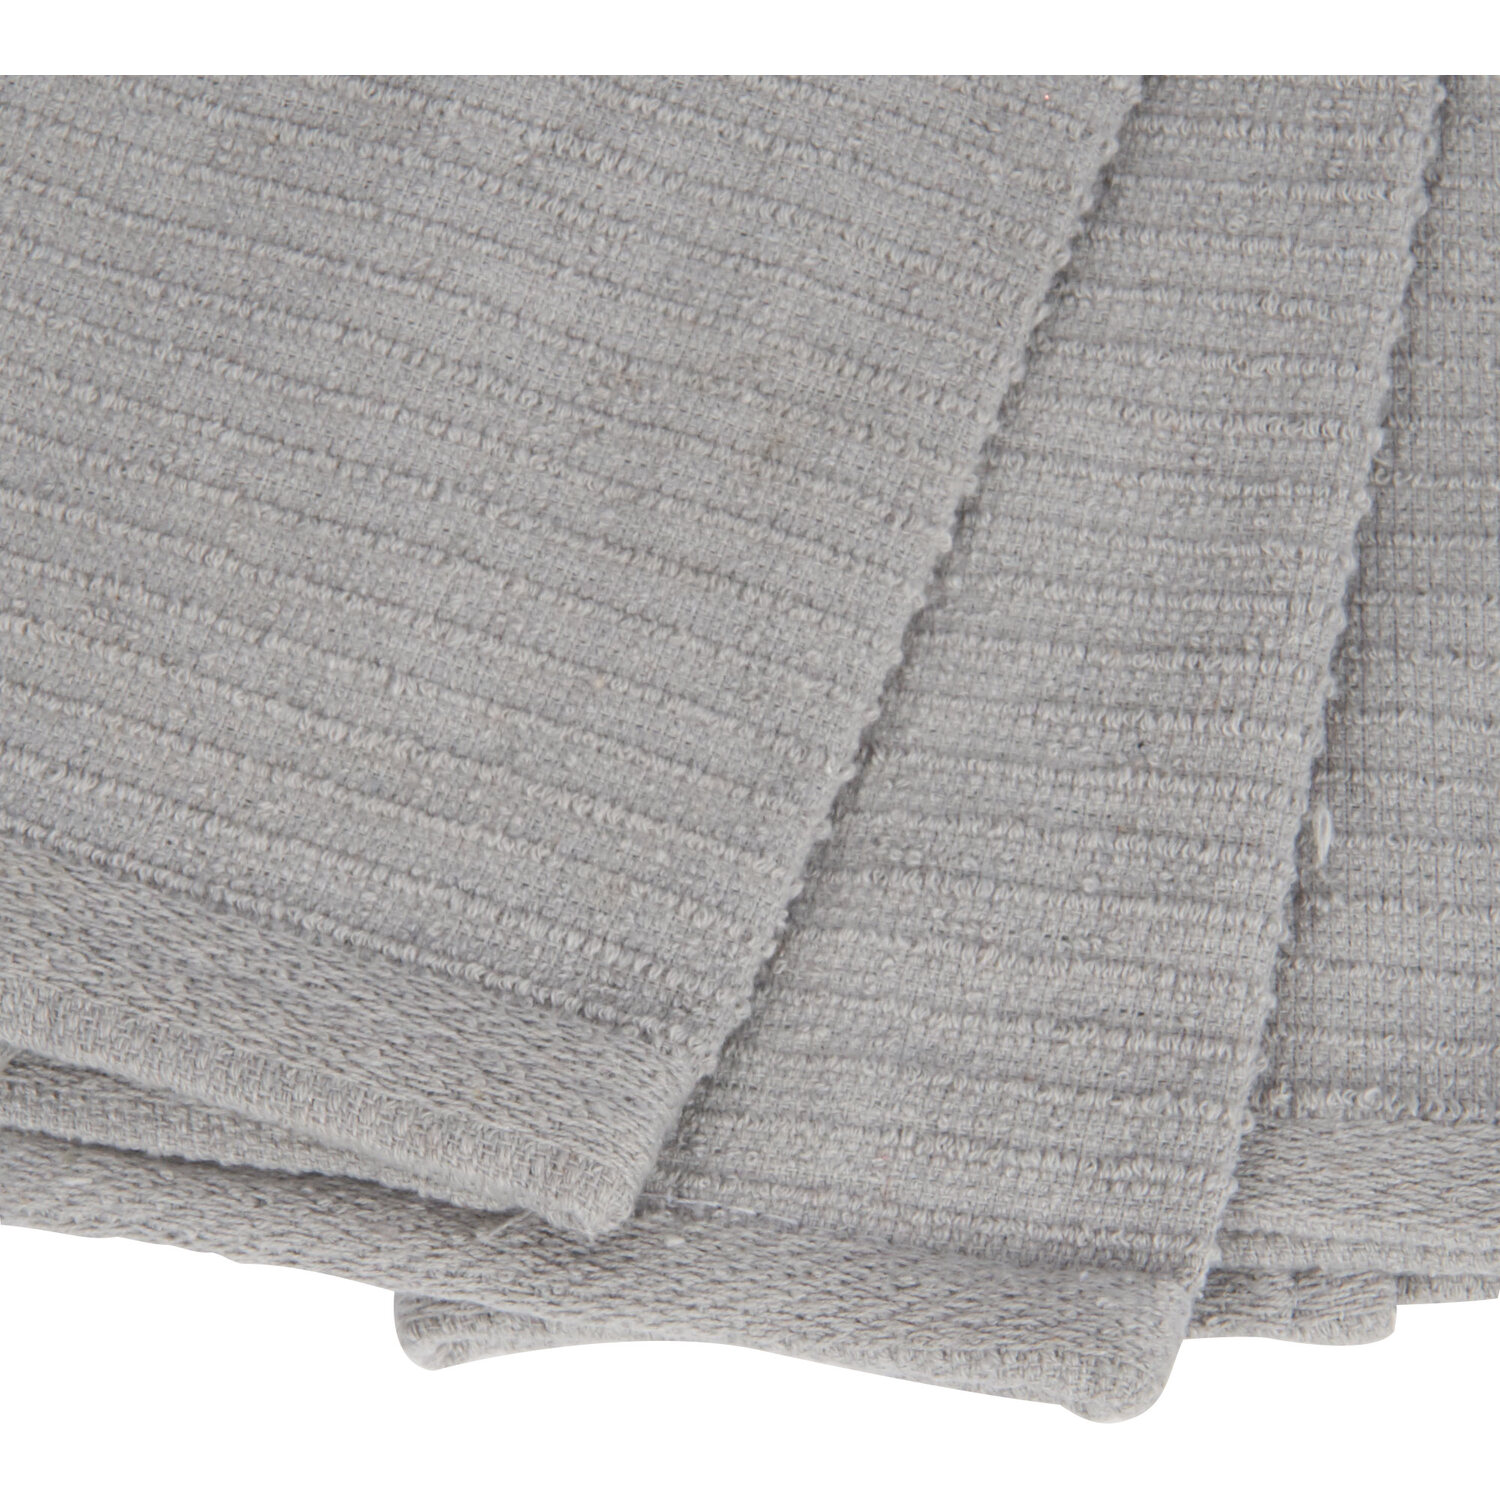 Pack of 2 Essentials Ribbed Terry Tea Towels - Grey Image 4